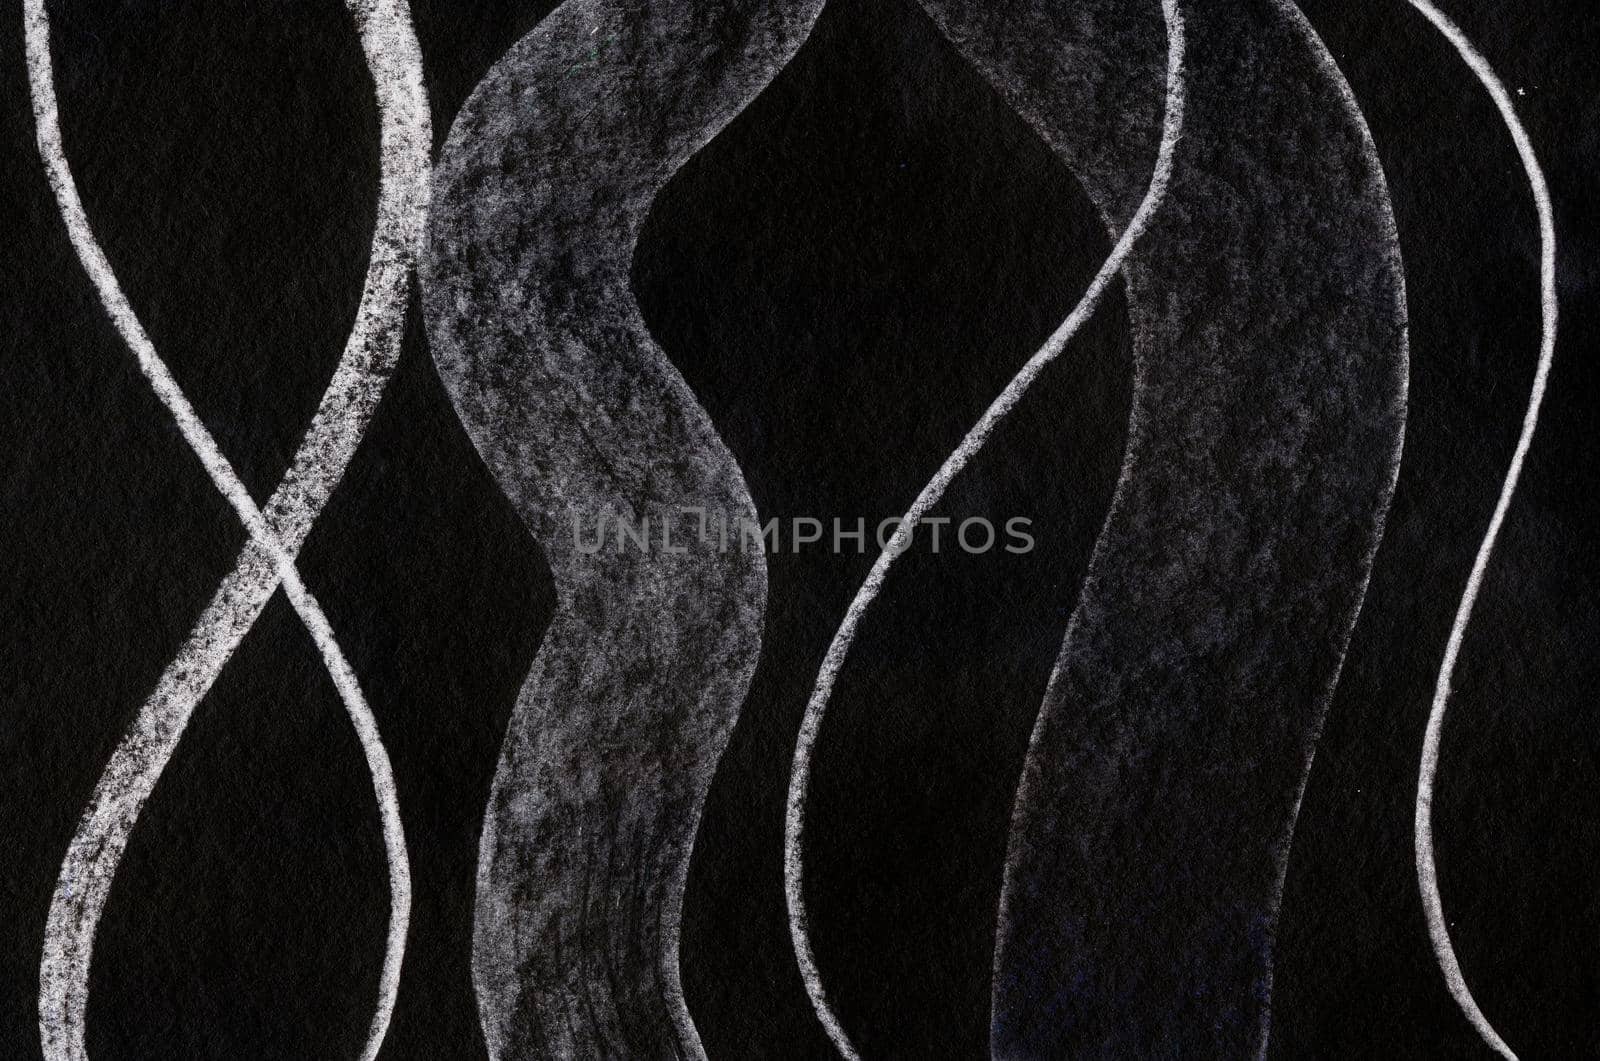 Abstract Pastel Hand Drawn Background Texture. Background Illustration Wavy Lines in Doodle Style Hand Drawn Sketch Art. White Waves on Black Background.